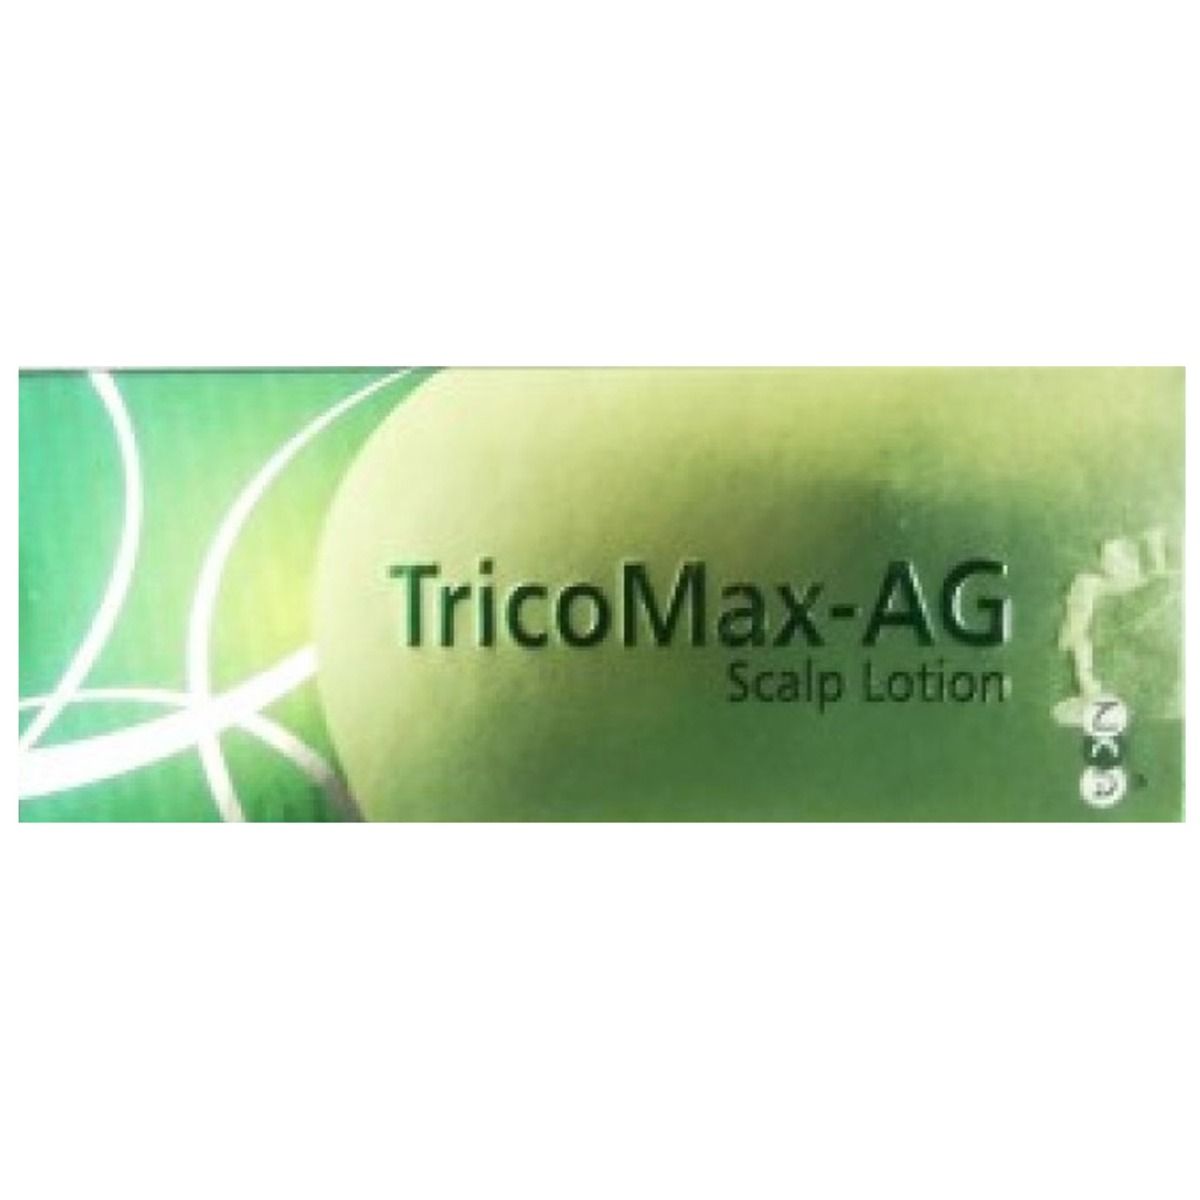 Buy Tricomax-Ag Scalp Lotion, 100 ml Online